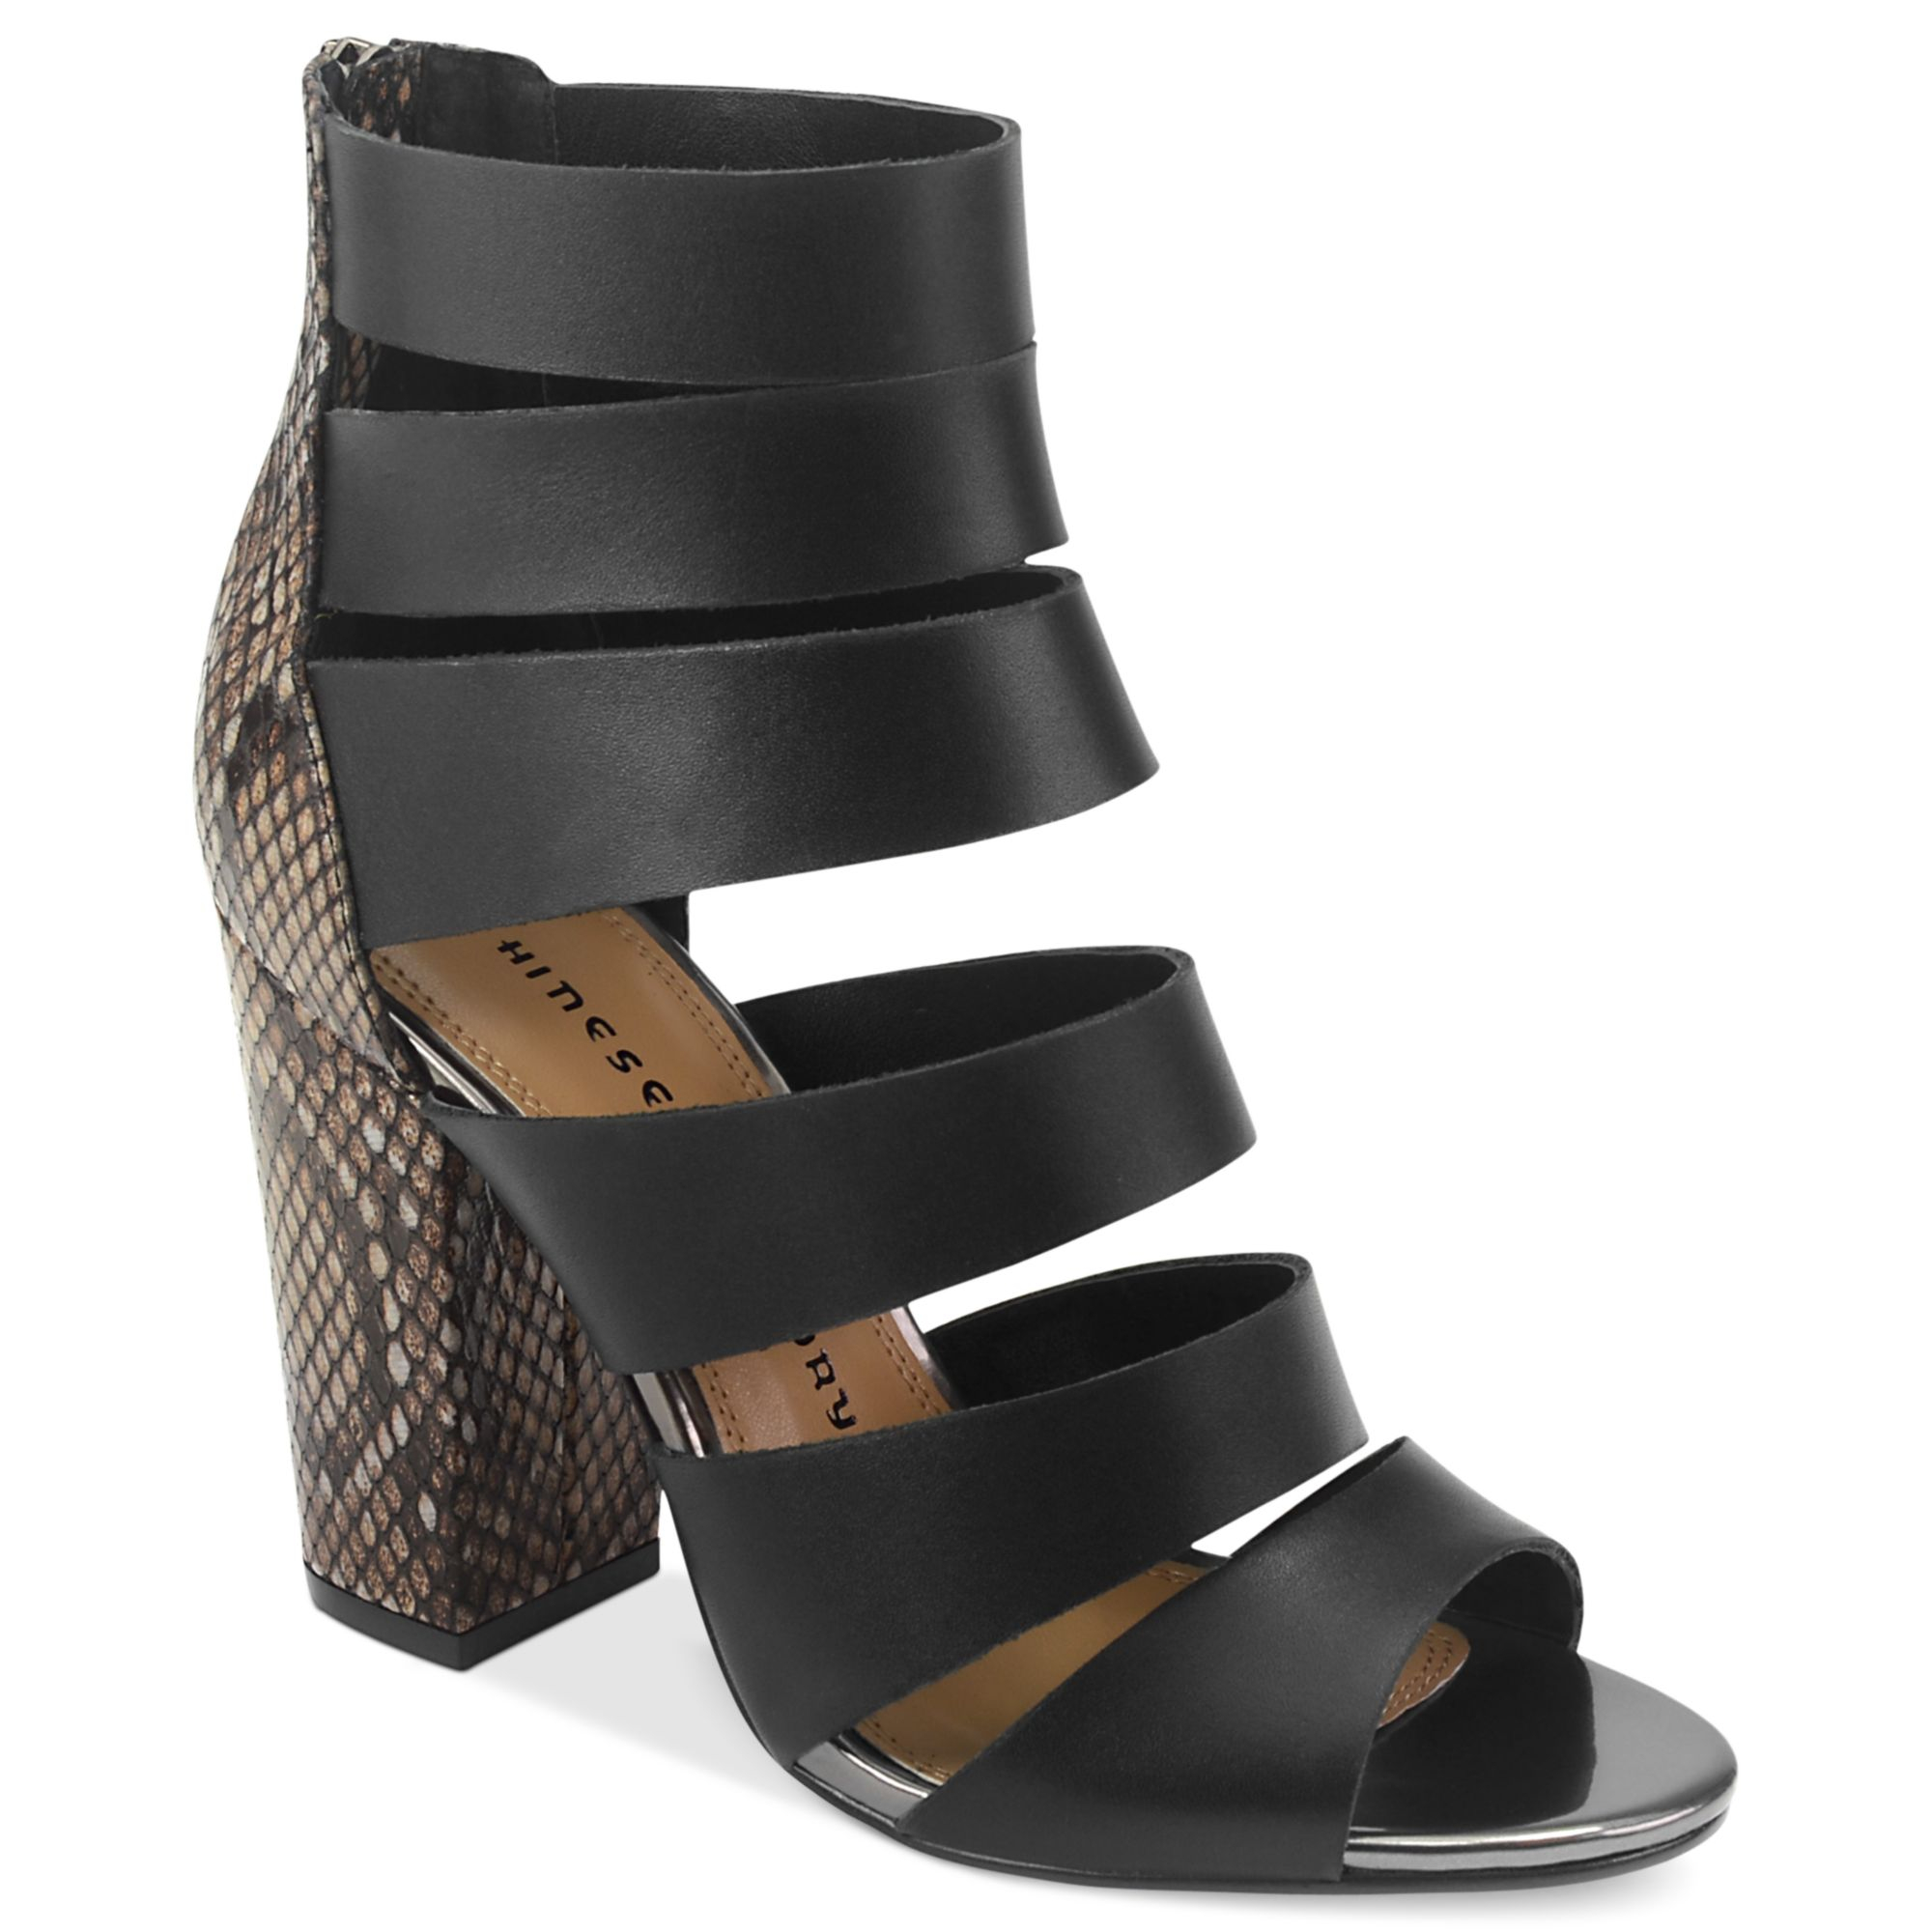 Chinese Laundry Bonafied Strappy City Sandals in Black | Lyst